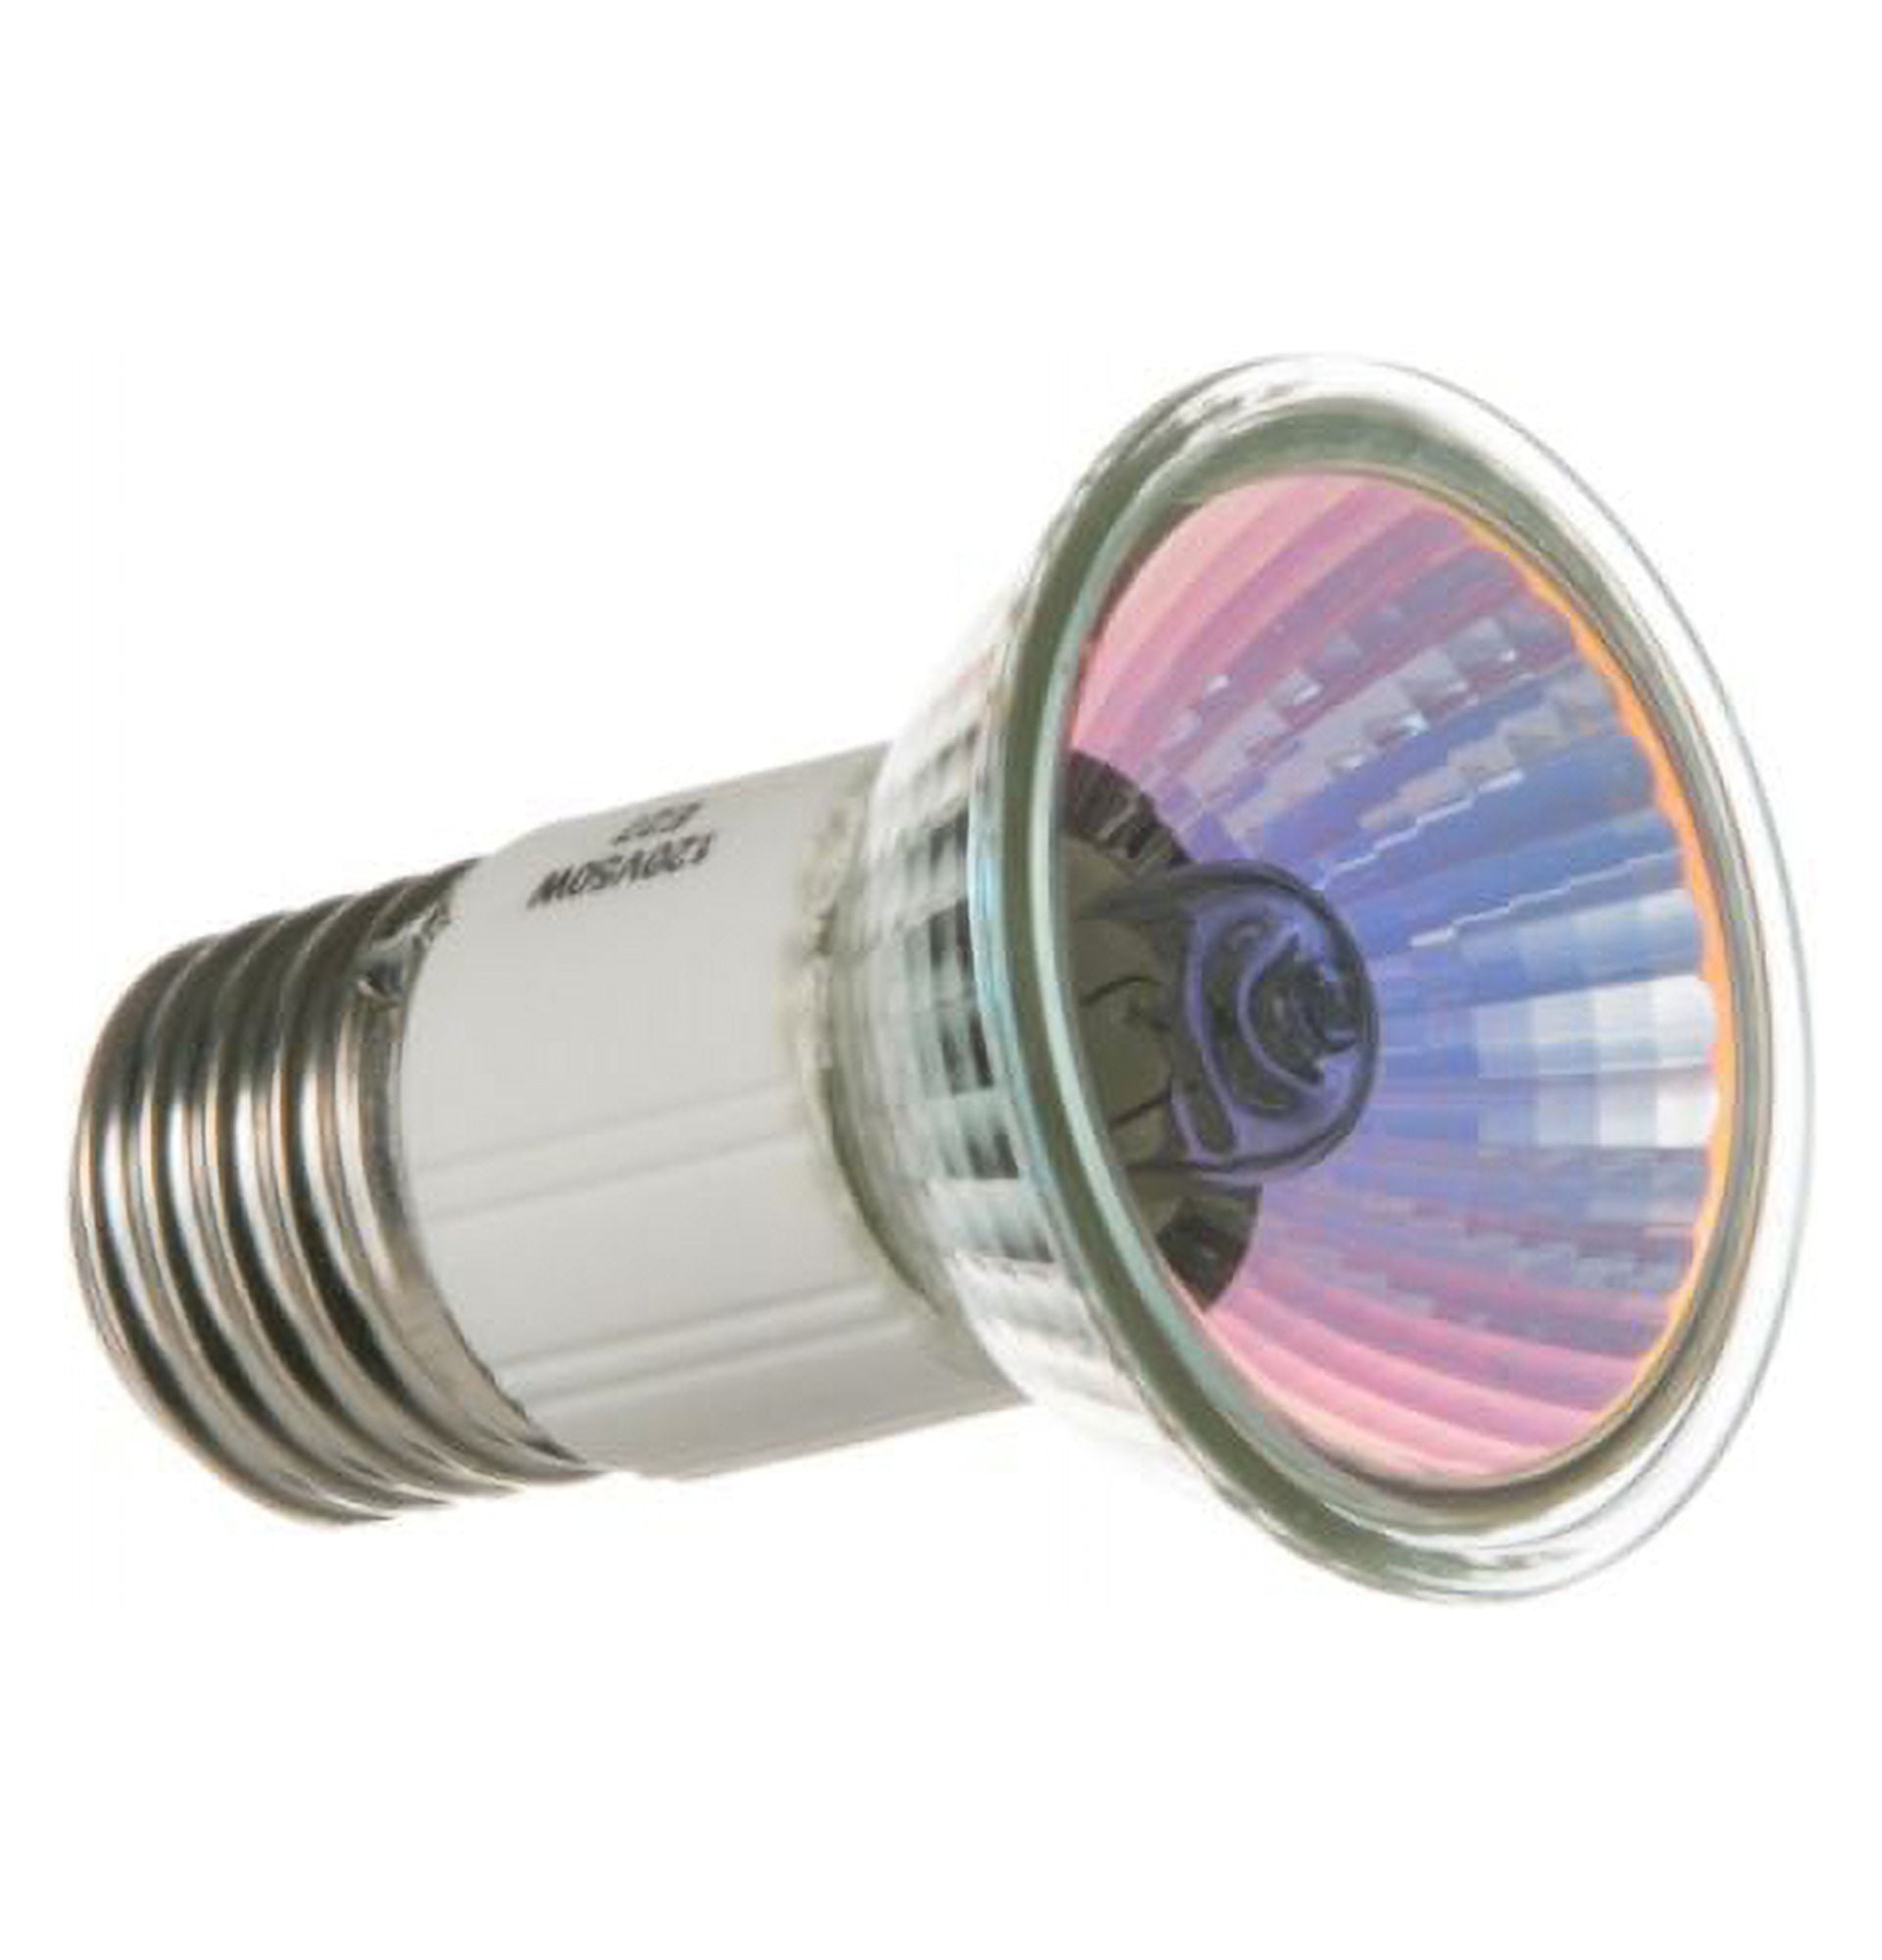 Looking for a replacement bulb. 28w halogen for a “Faber” stove range.  Model #INSM28GR250-B : r/appliancerepair